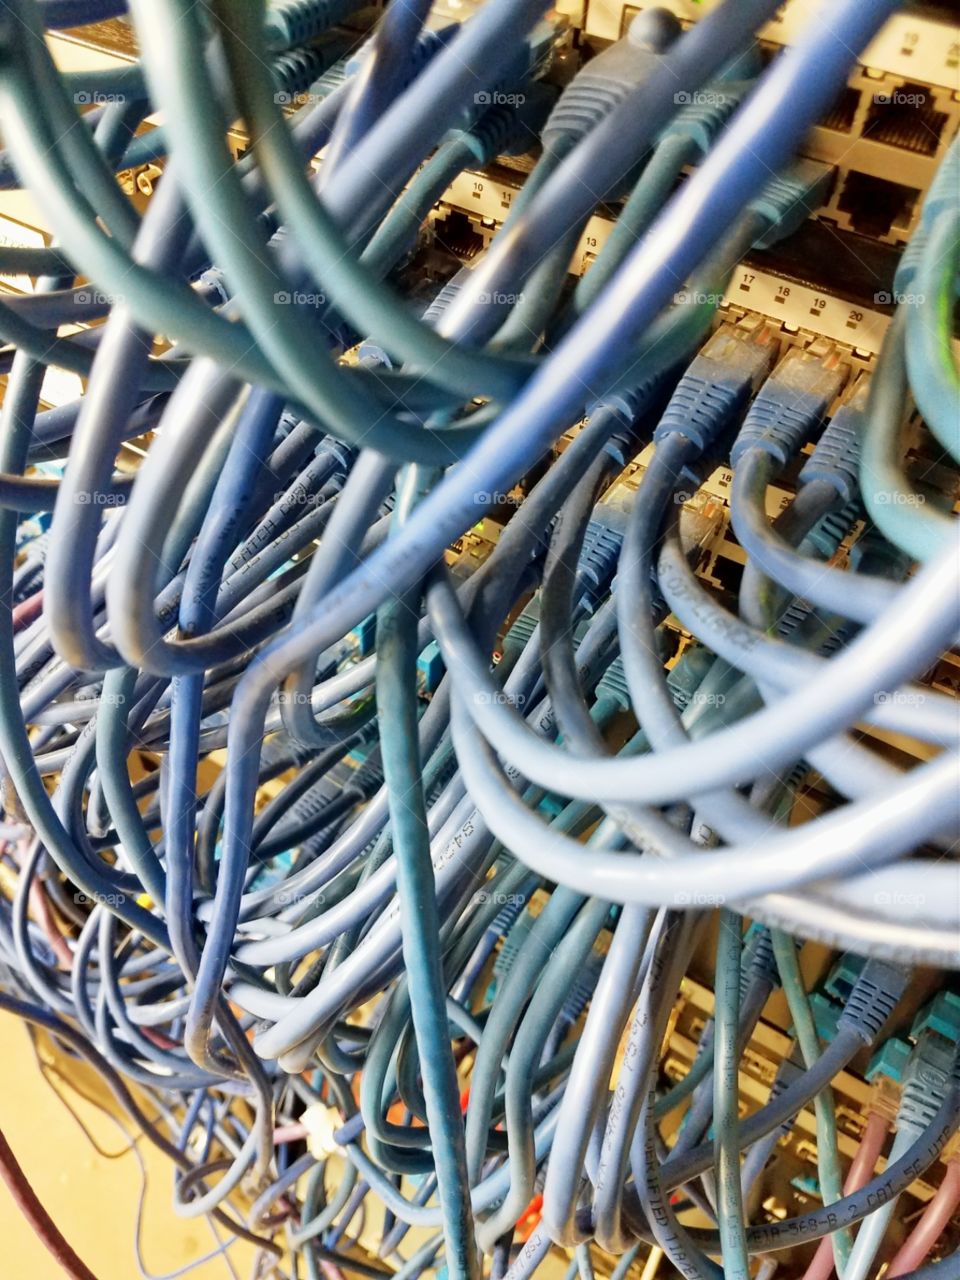 Network Cable Mess